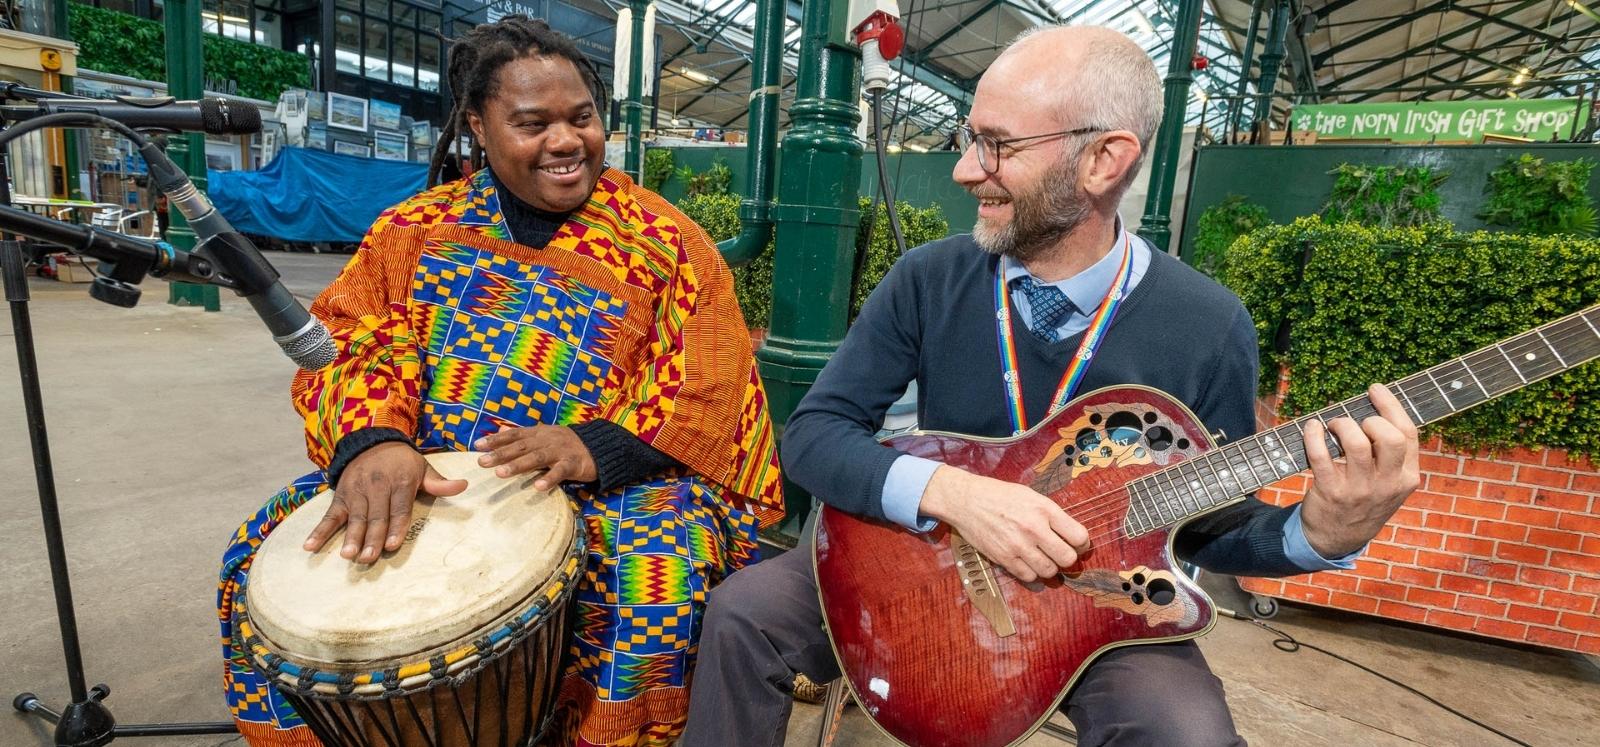 musicians playing djembe and guitar at the Black History Month expo, St George's Market